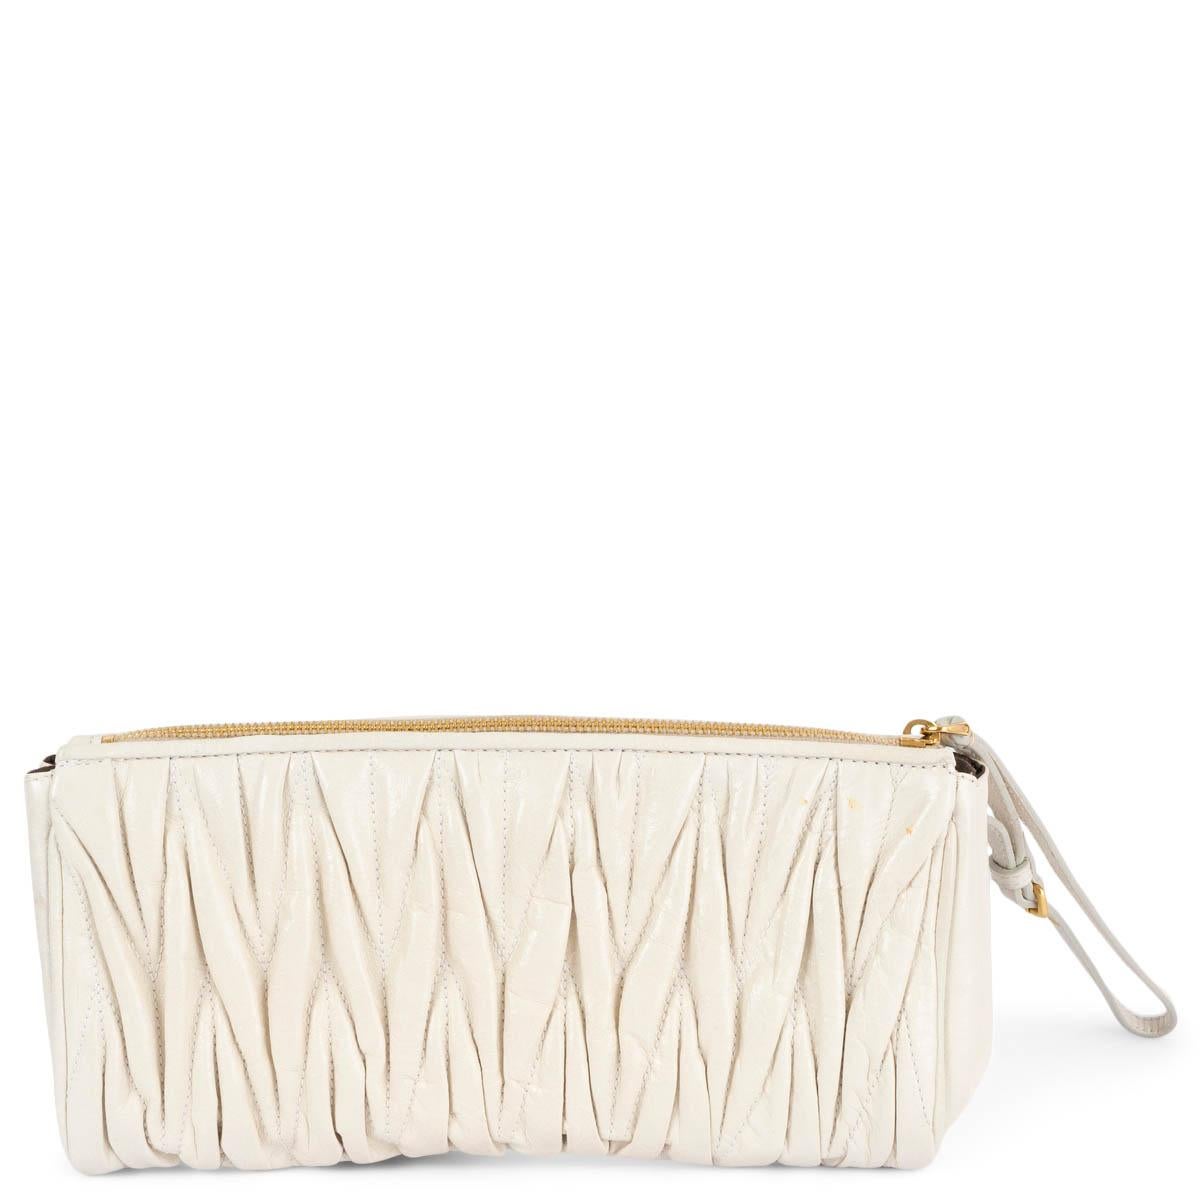 Beige MIU MIU ivory leather MATELASSE QUILTED Wristlet Clutch Bag For Sale